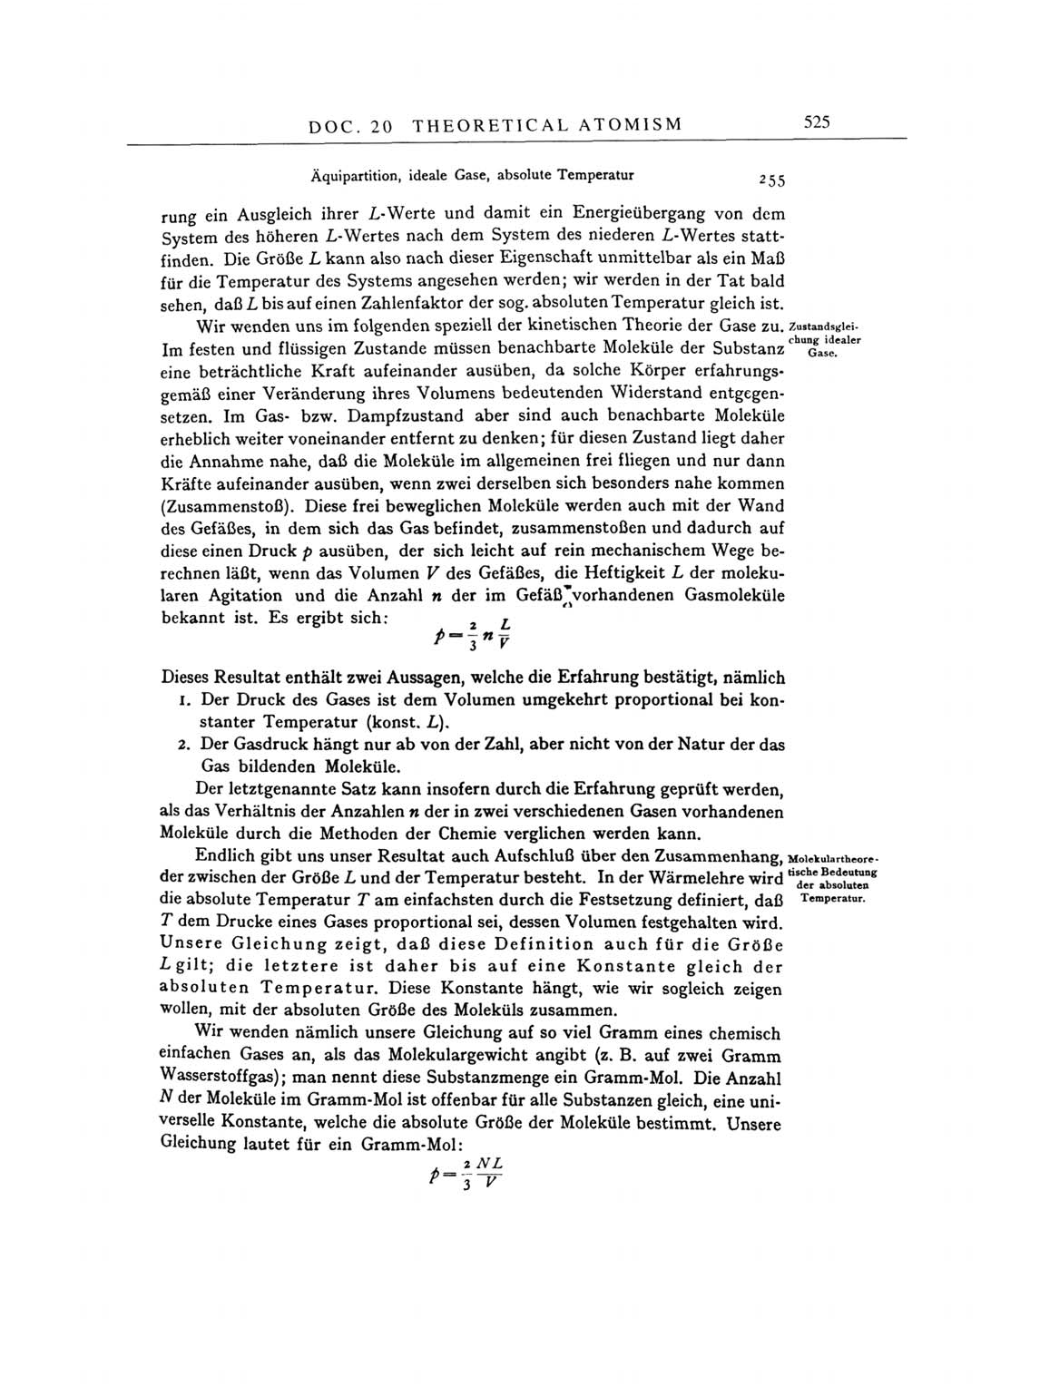 Volume 4: The Swiss Years: Writings 1912-1914 page 525